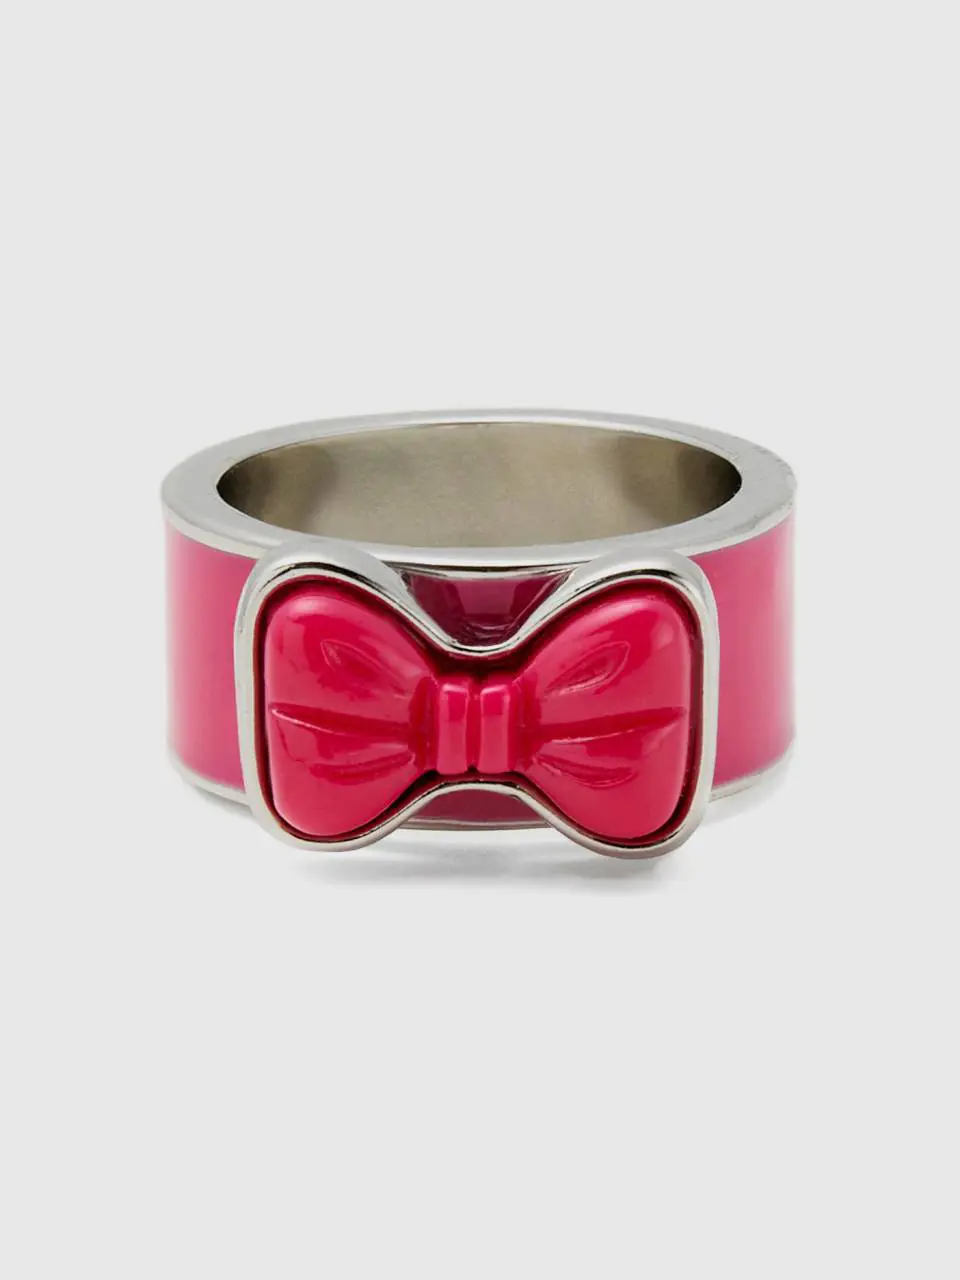 Benetton fuchsia band ring with bow. 1